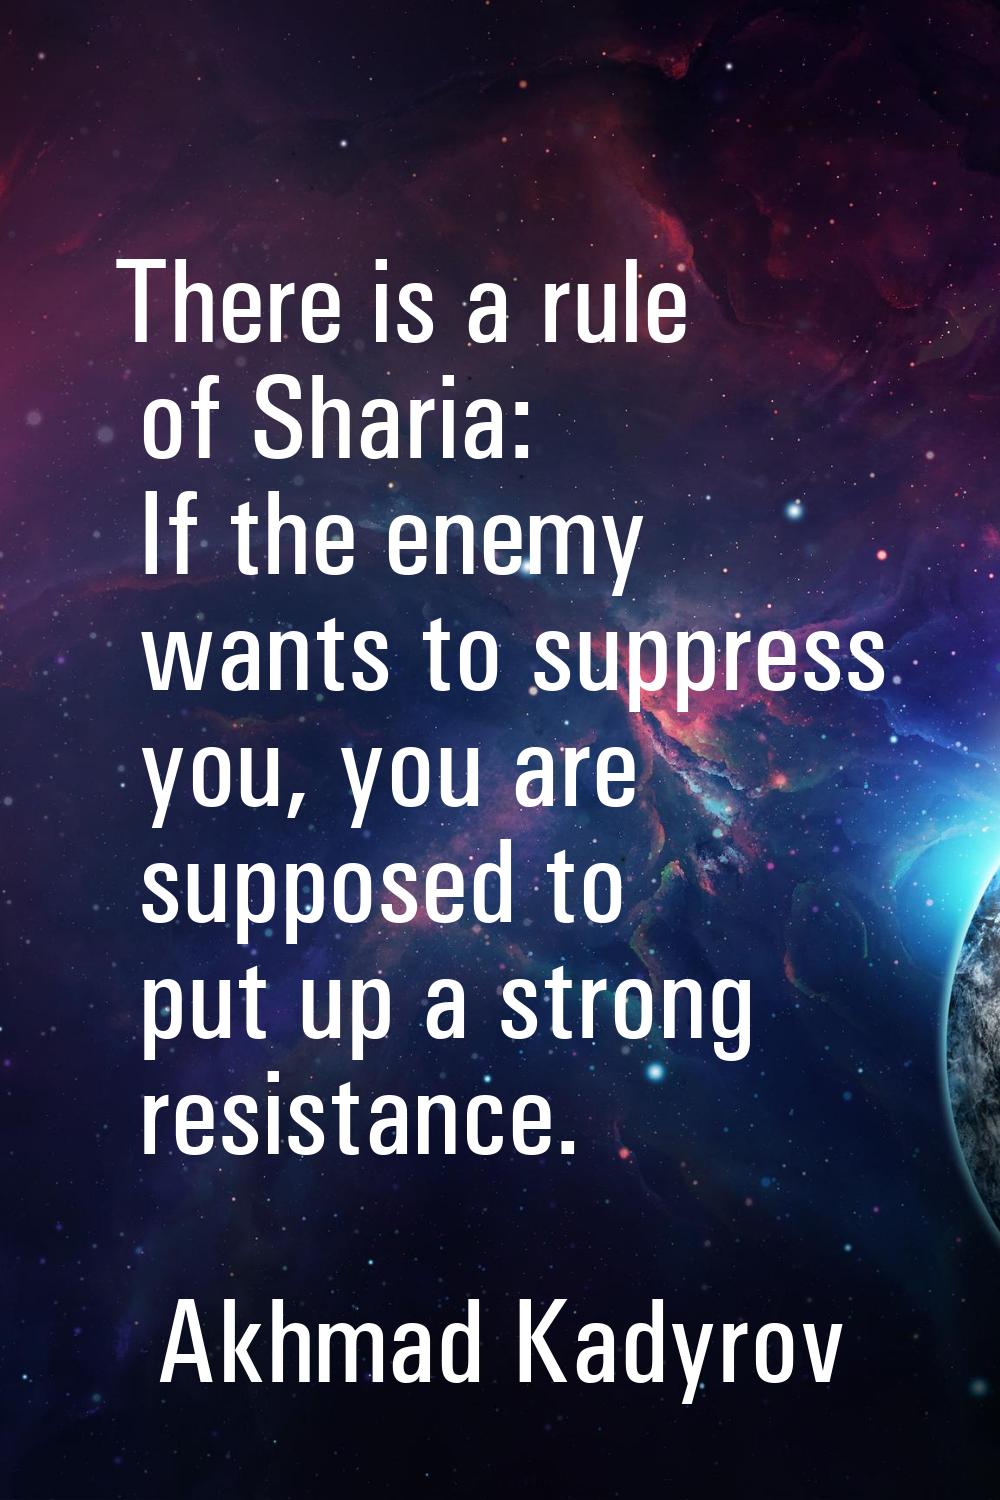 There is a rule of Sharia: If the enemy wants to suppress you, you are supposed to put up a strong 